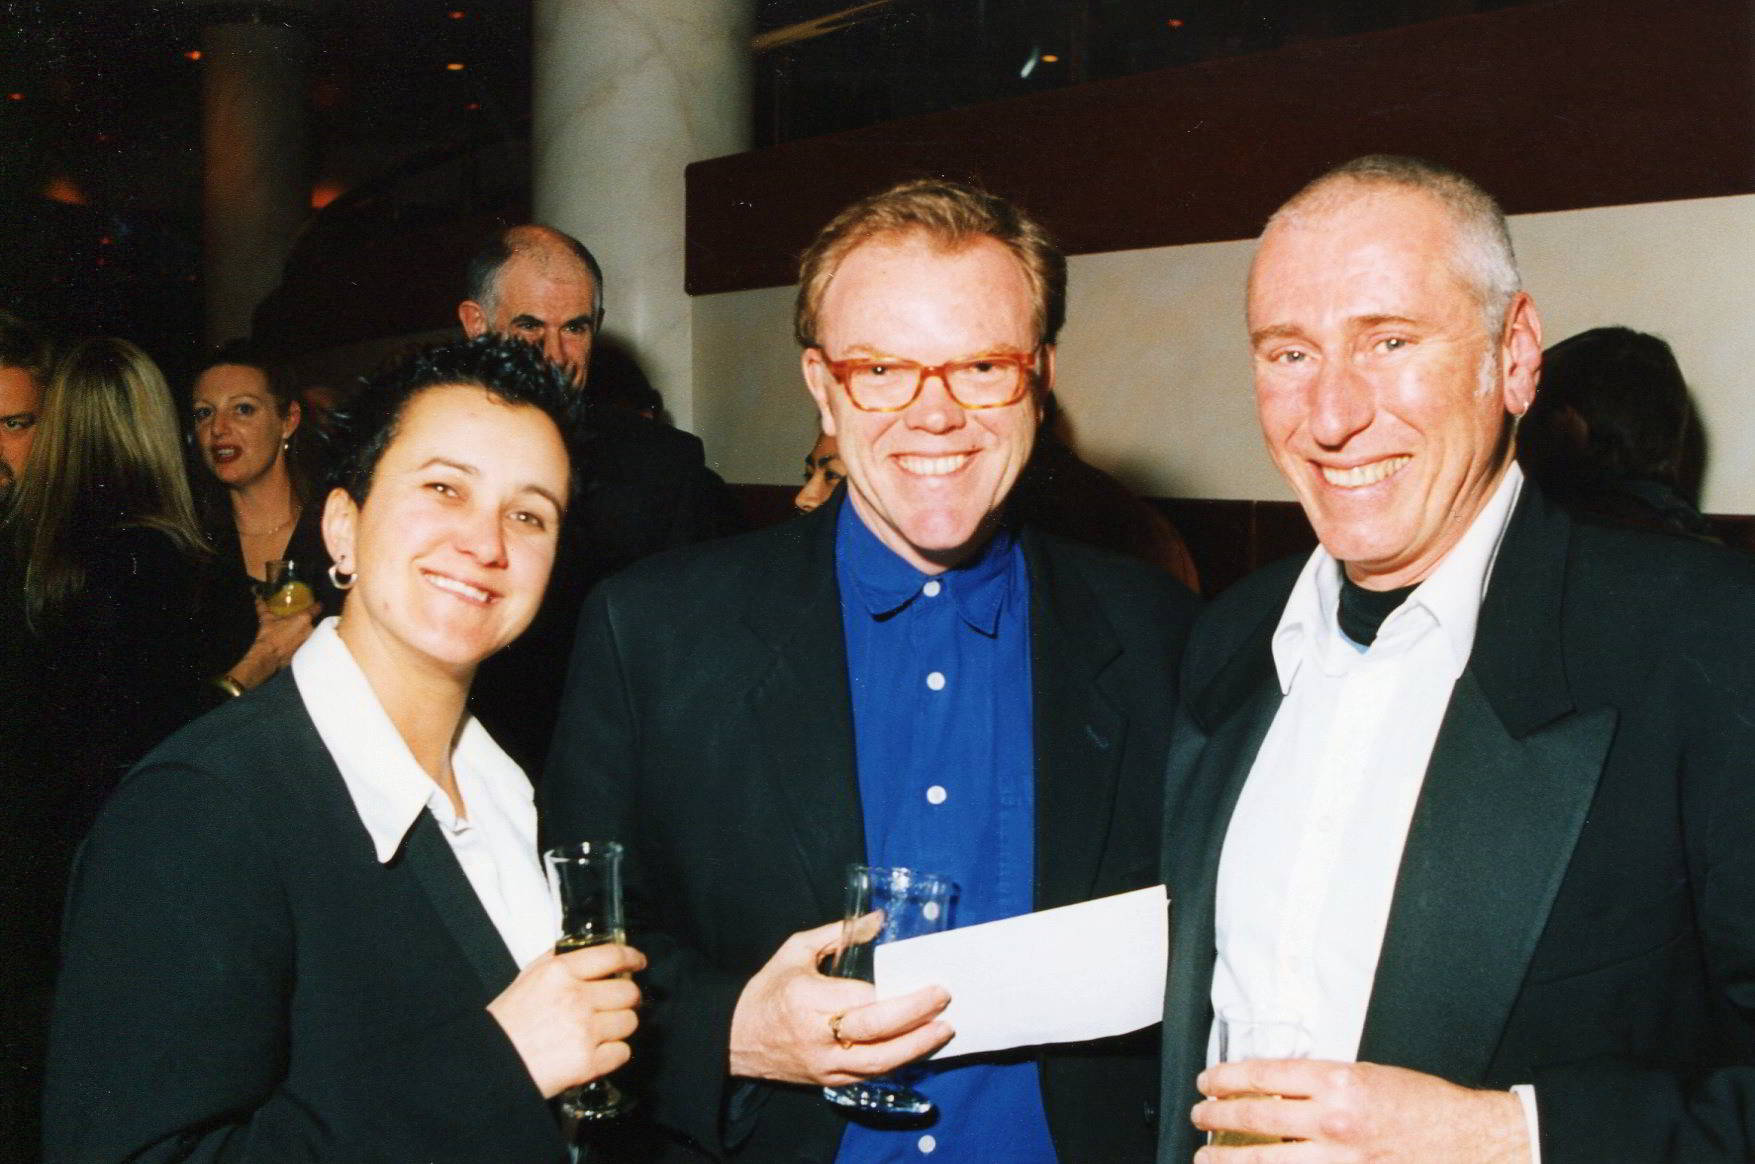 __Artistic Director David Bell__ with Megan Cameron and Rod Primrose 2 party goers posing